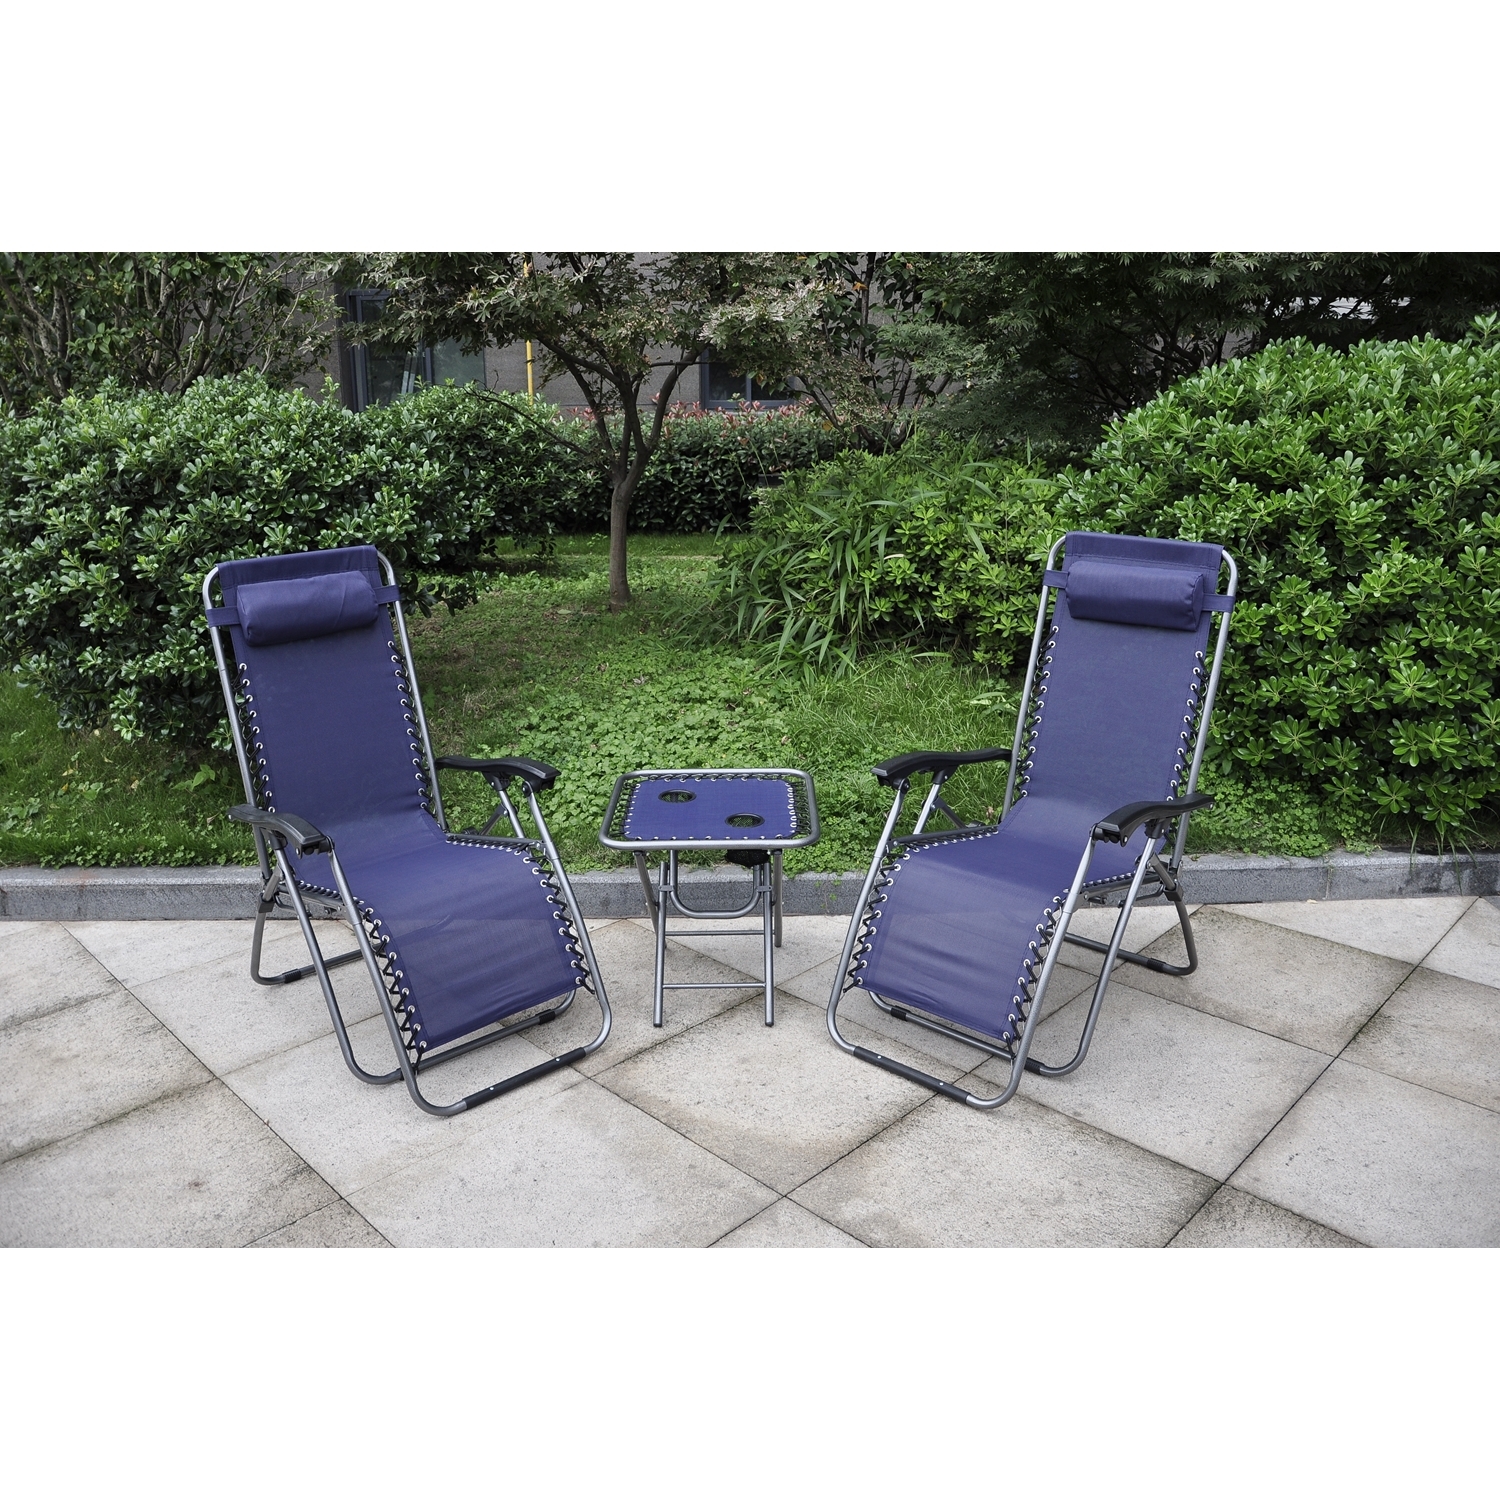 Active Sport Blue Zero Gravity Recliner Garden Chairs and Table Set Image 4